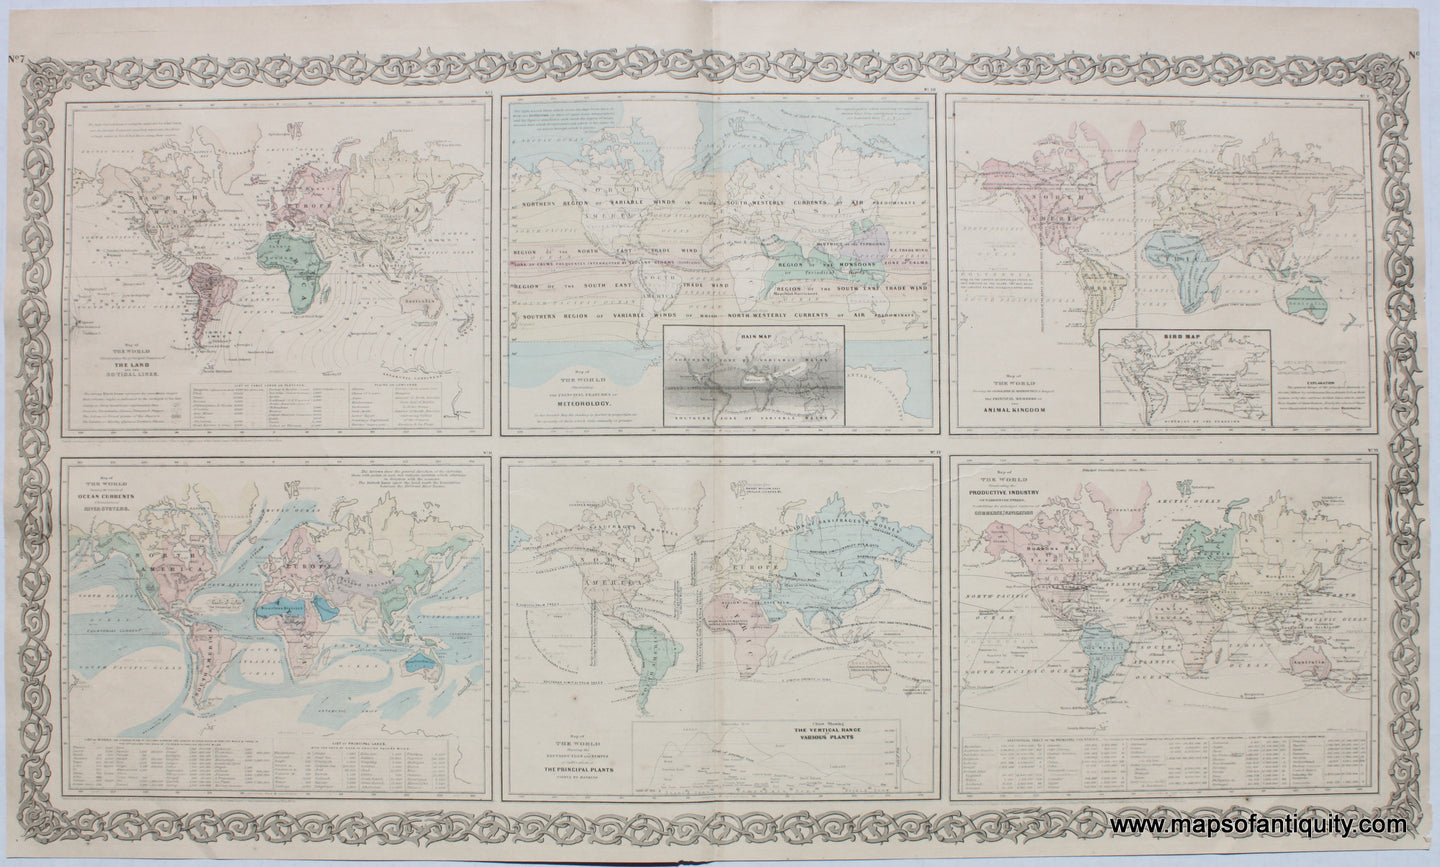 Antique-Hand-Colored-Map-Colton's-Maps-of-the-World-World--1871-Colton-Maps-Of-Antiquity